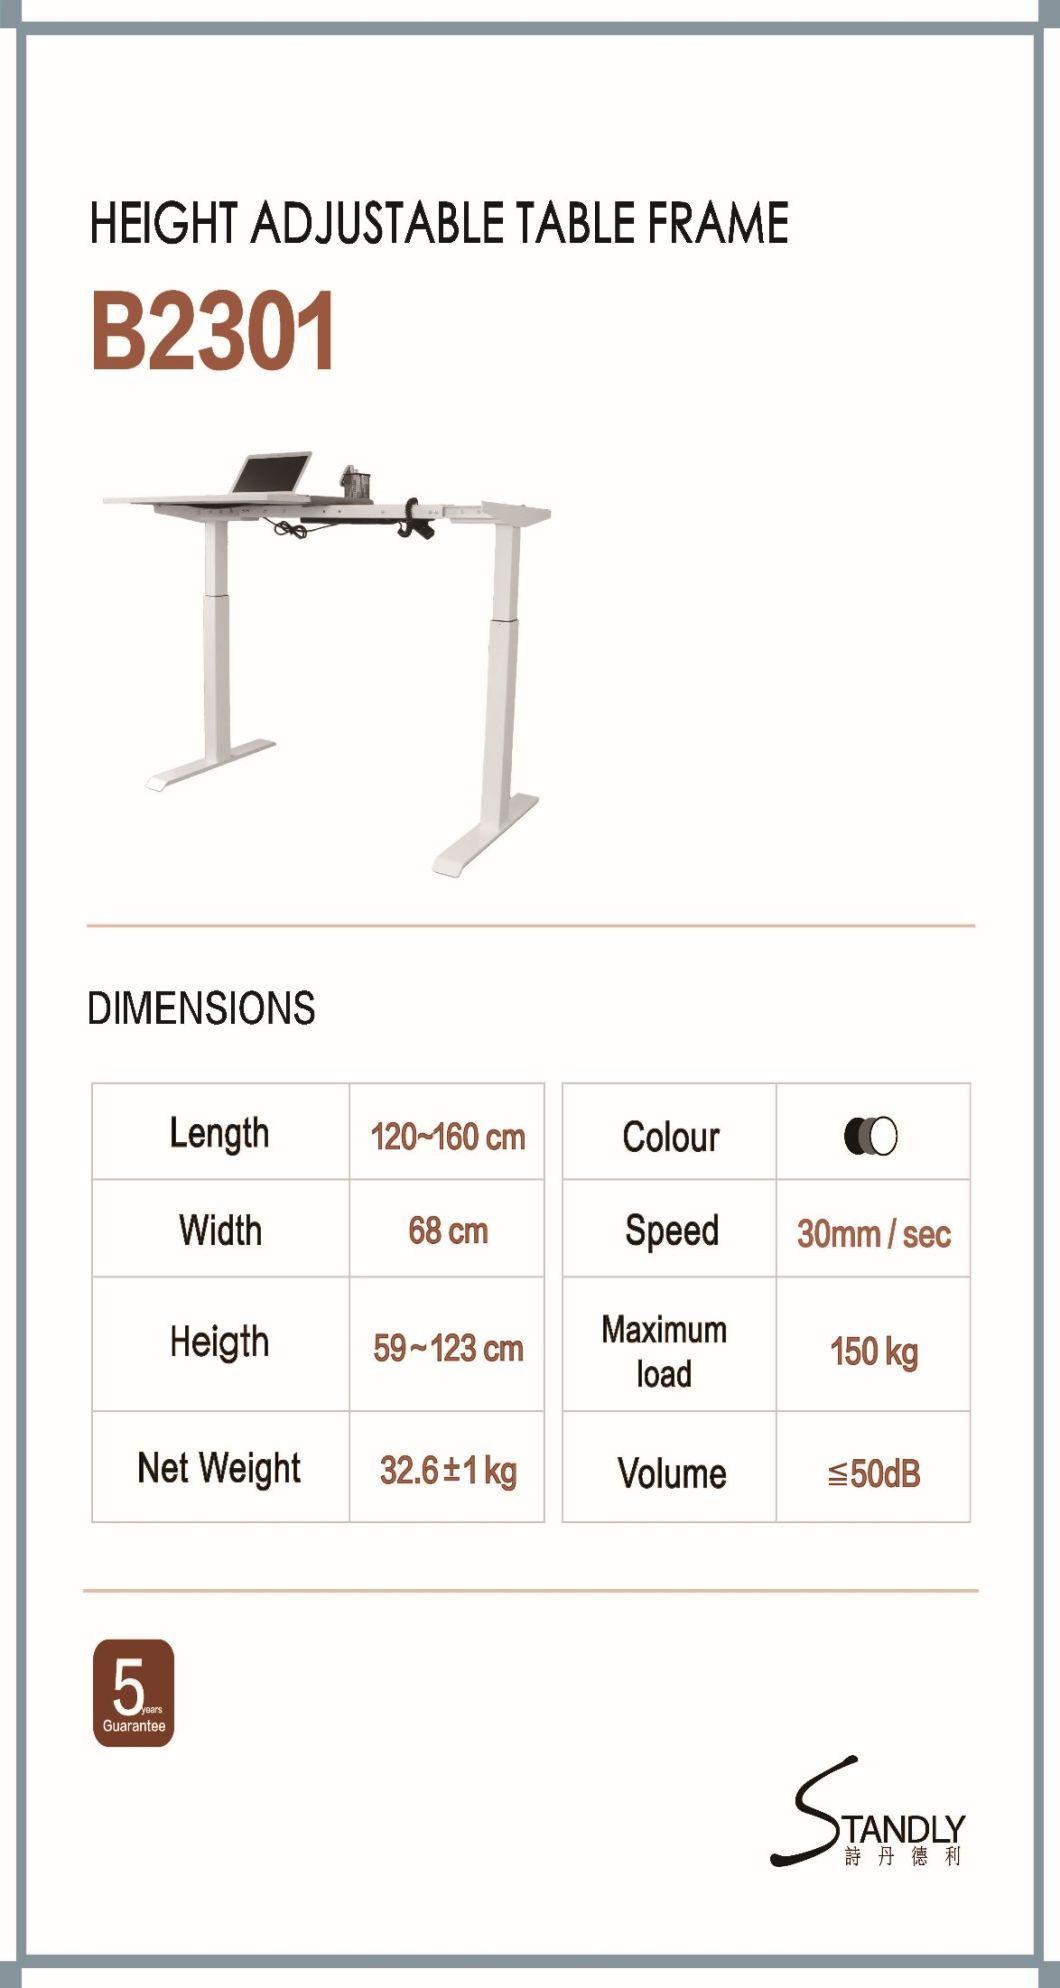 Smart Electric Dual Motors Two Stages Height Adjustable Sit to Stand up Lifting Table Frame /Computer Desk/Office Table /Standing Desk (B2201AS)